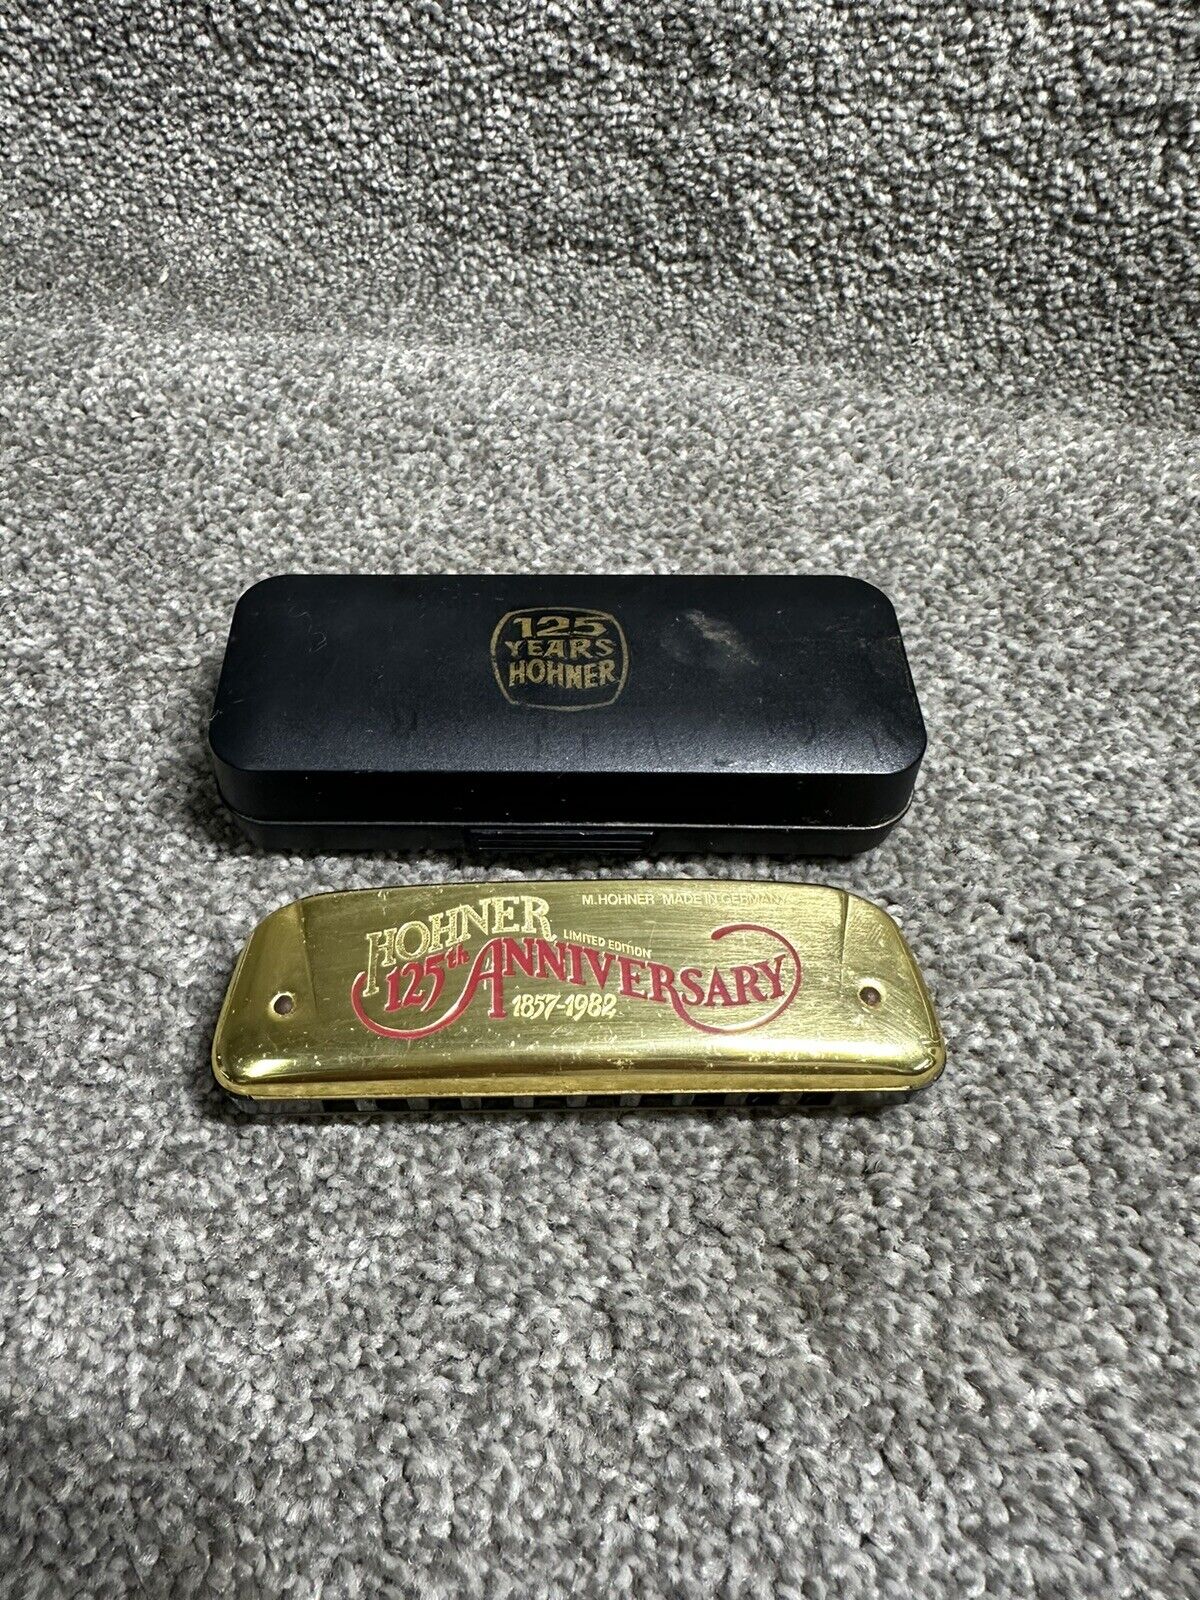 Hohner 125th Anniversary Limited Edition Golden Melody Harp Harmonica